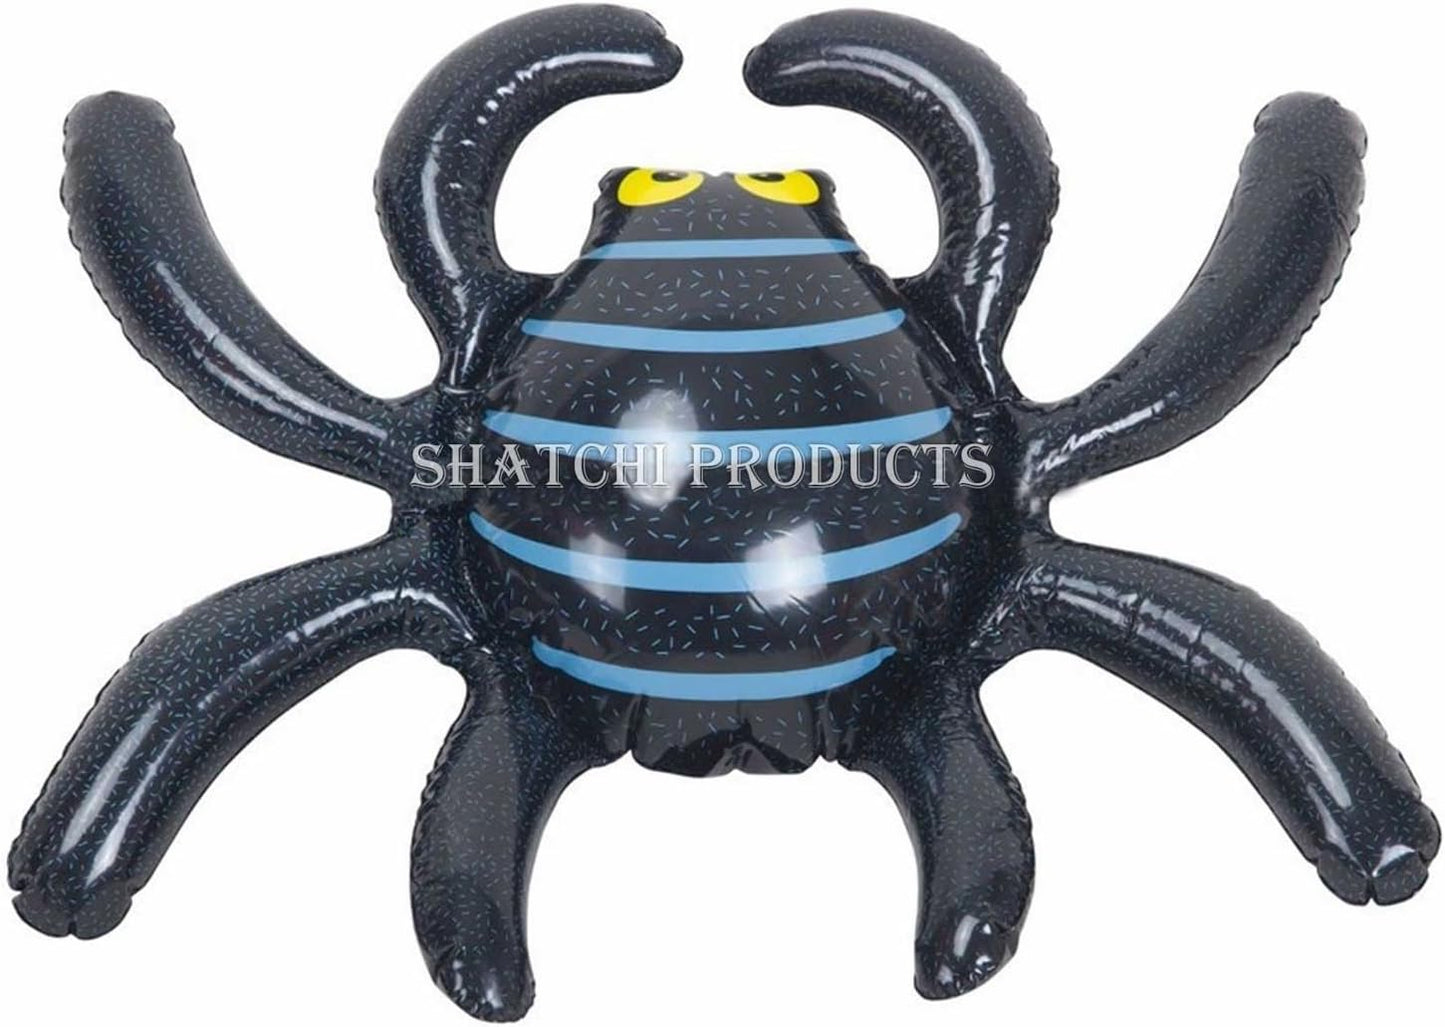 Large Inflatable Spider 46 x 36cm Halloween Decoration Party Scary Spooky Black